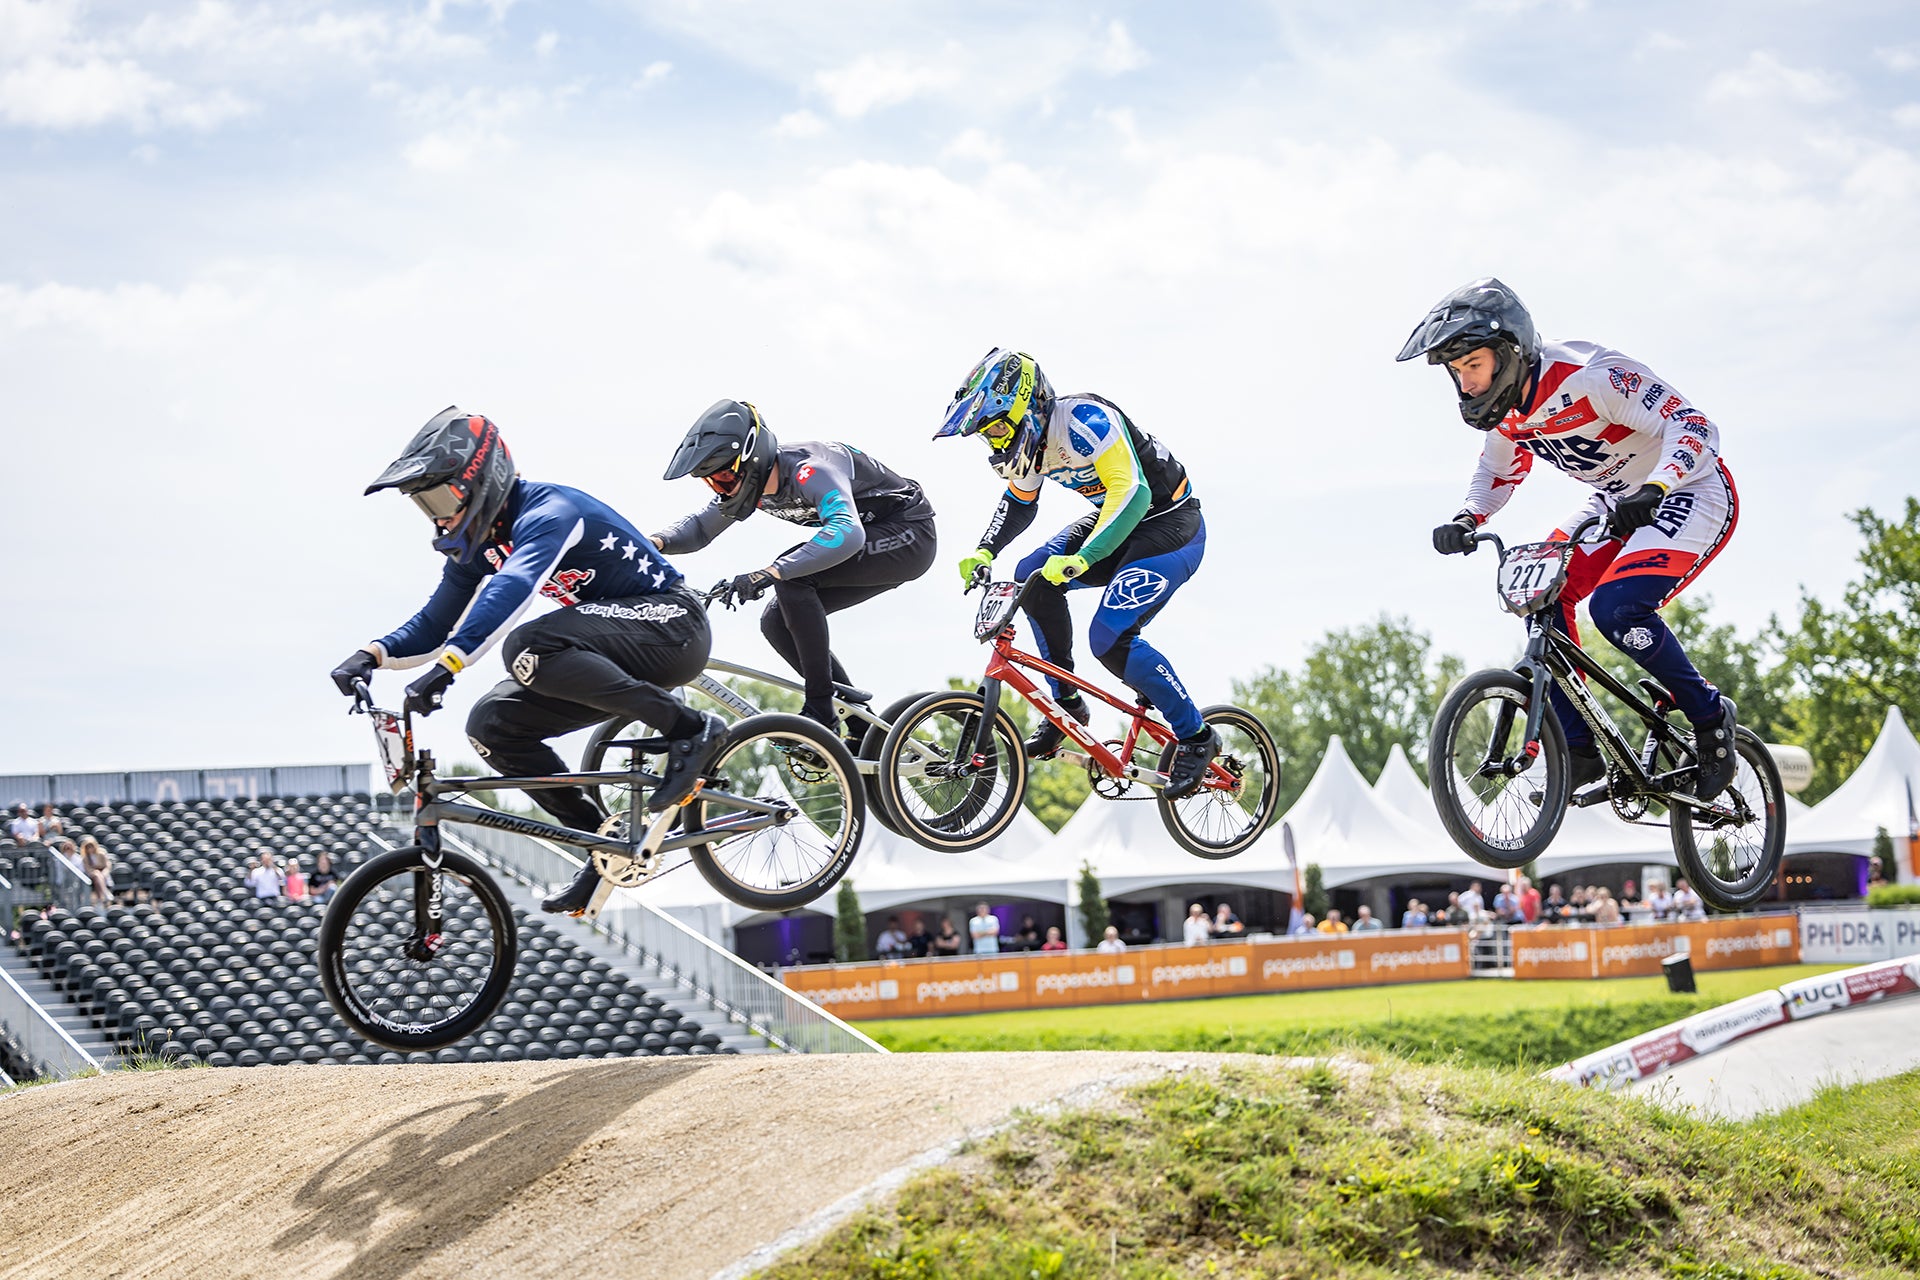 Cam Wood Takes 2nd at Papendal UCI SX BMX World Cup